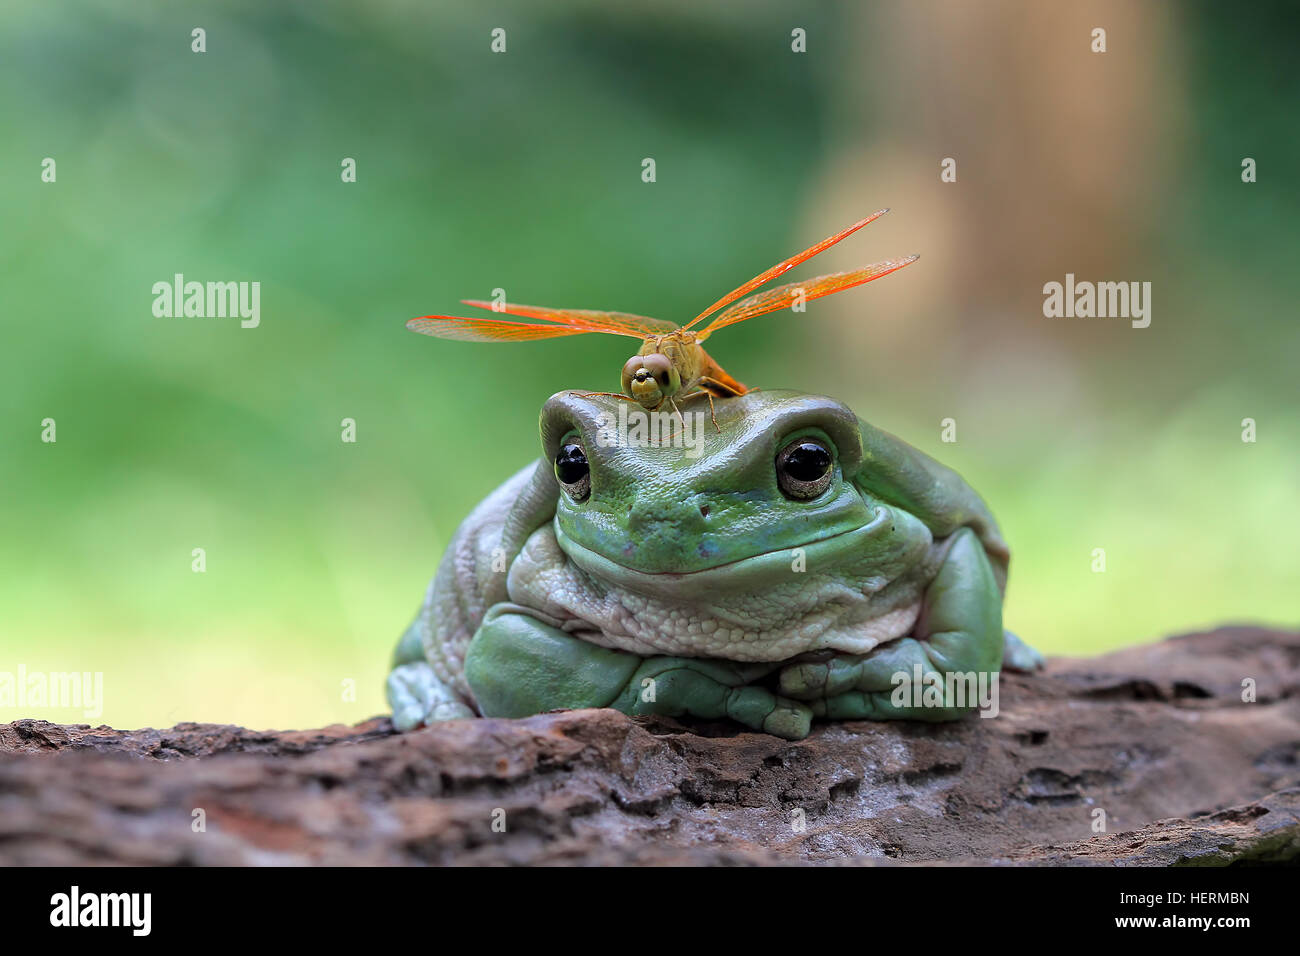 Dragonfly sitting on a dumpy frog, Indonesia Stock Photo